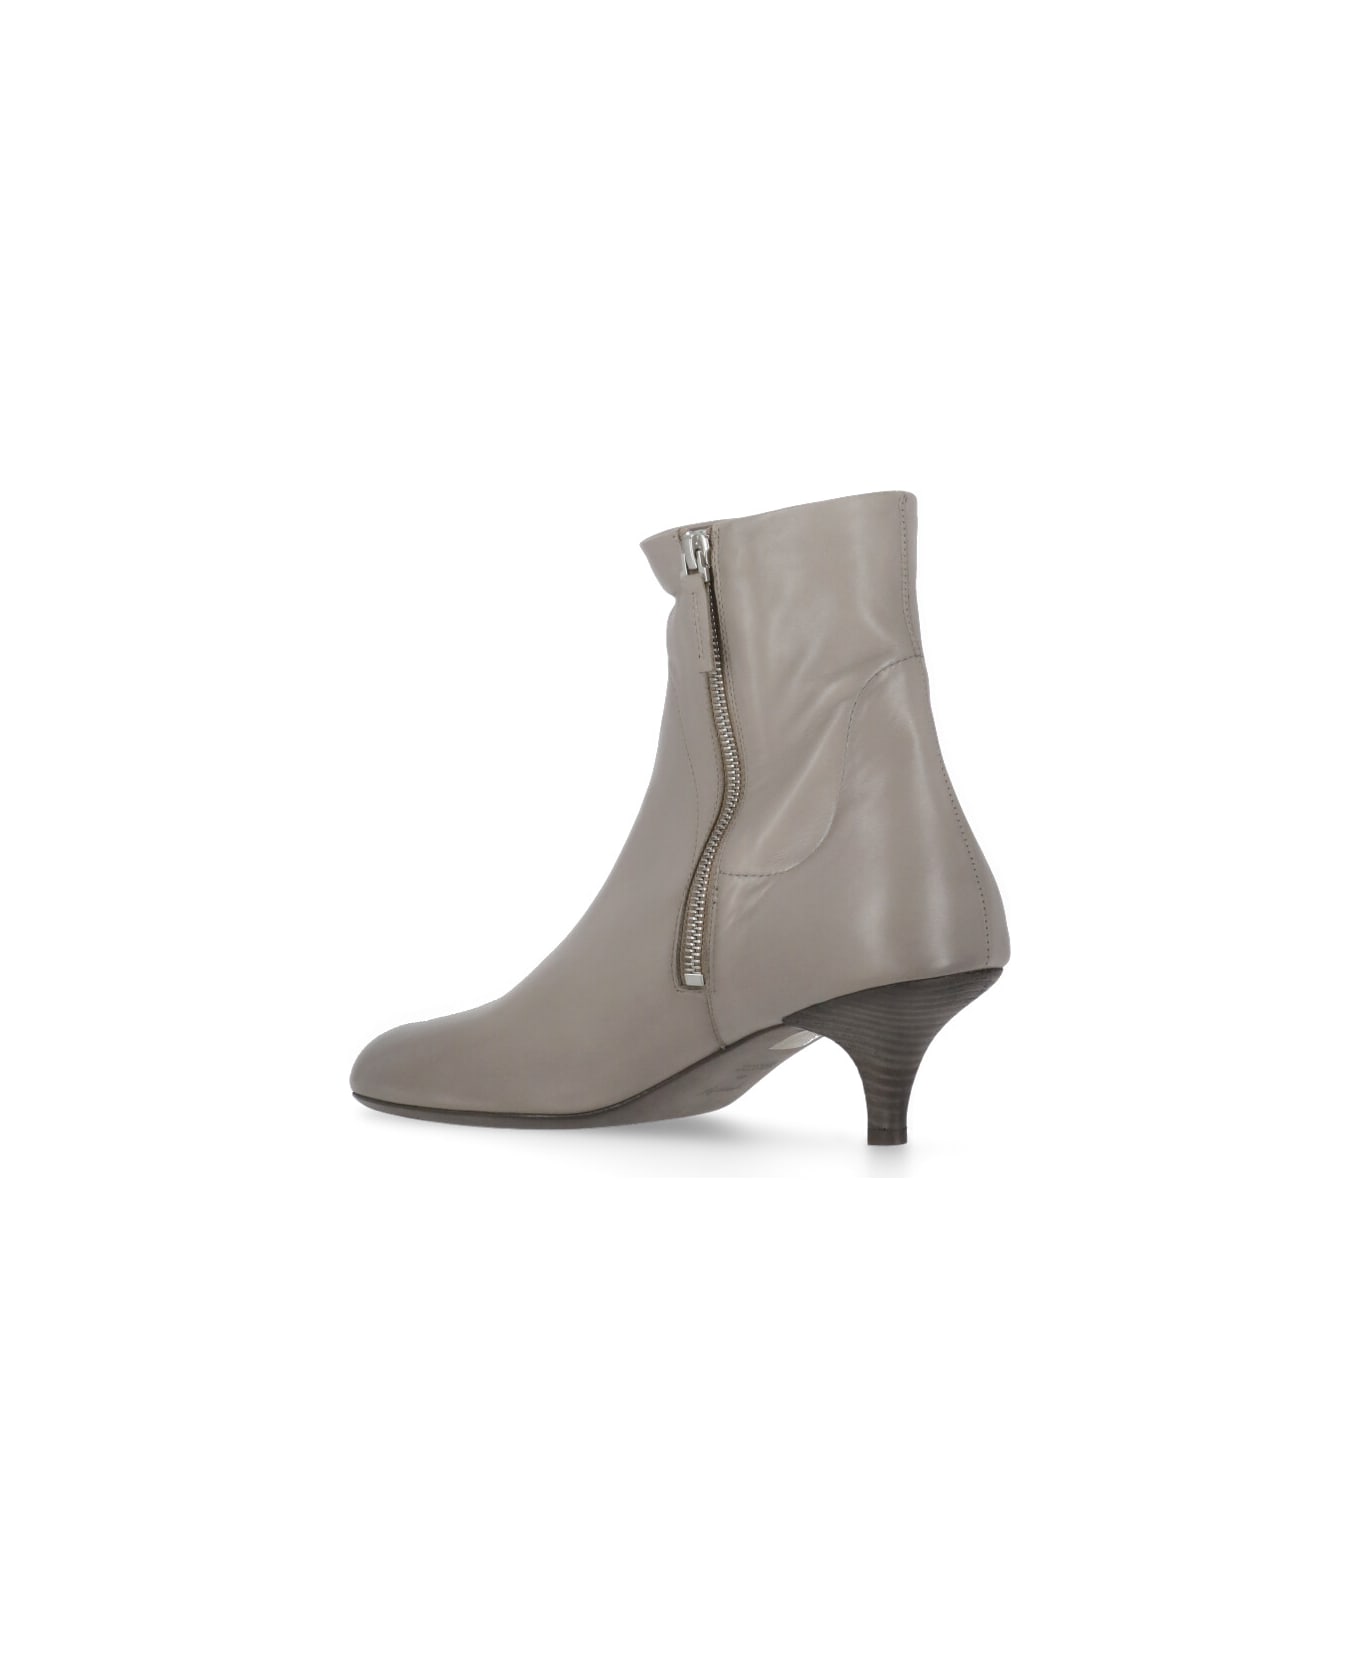 Marsell Spilla Ankle Boots - Grey ブーツ